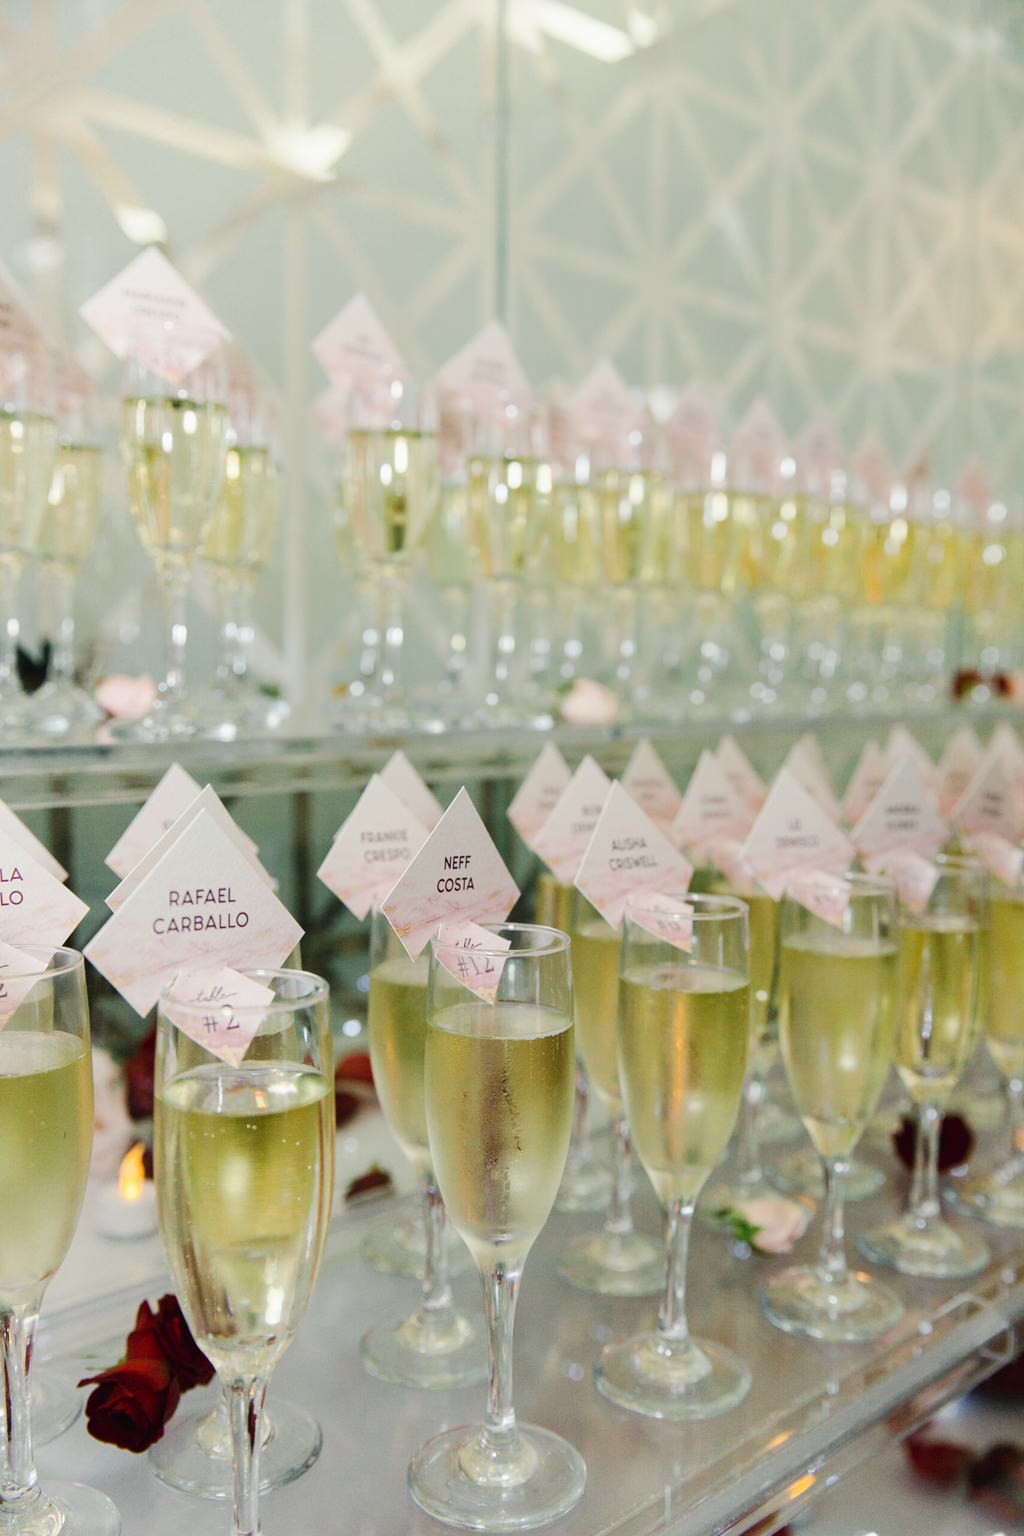 Modern Wedding Reception Unique Seating Cards on Glasses of Champagne